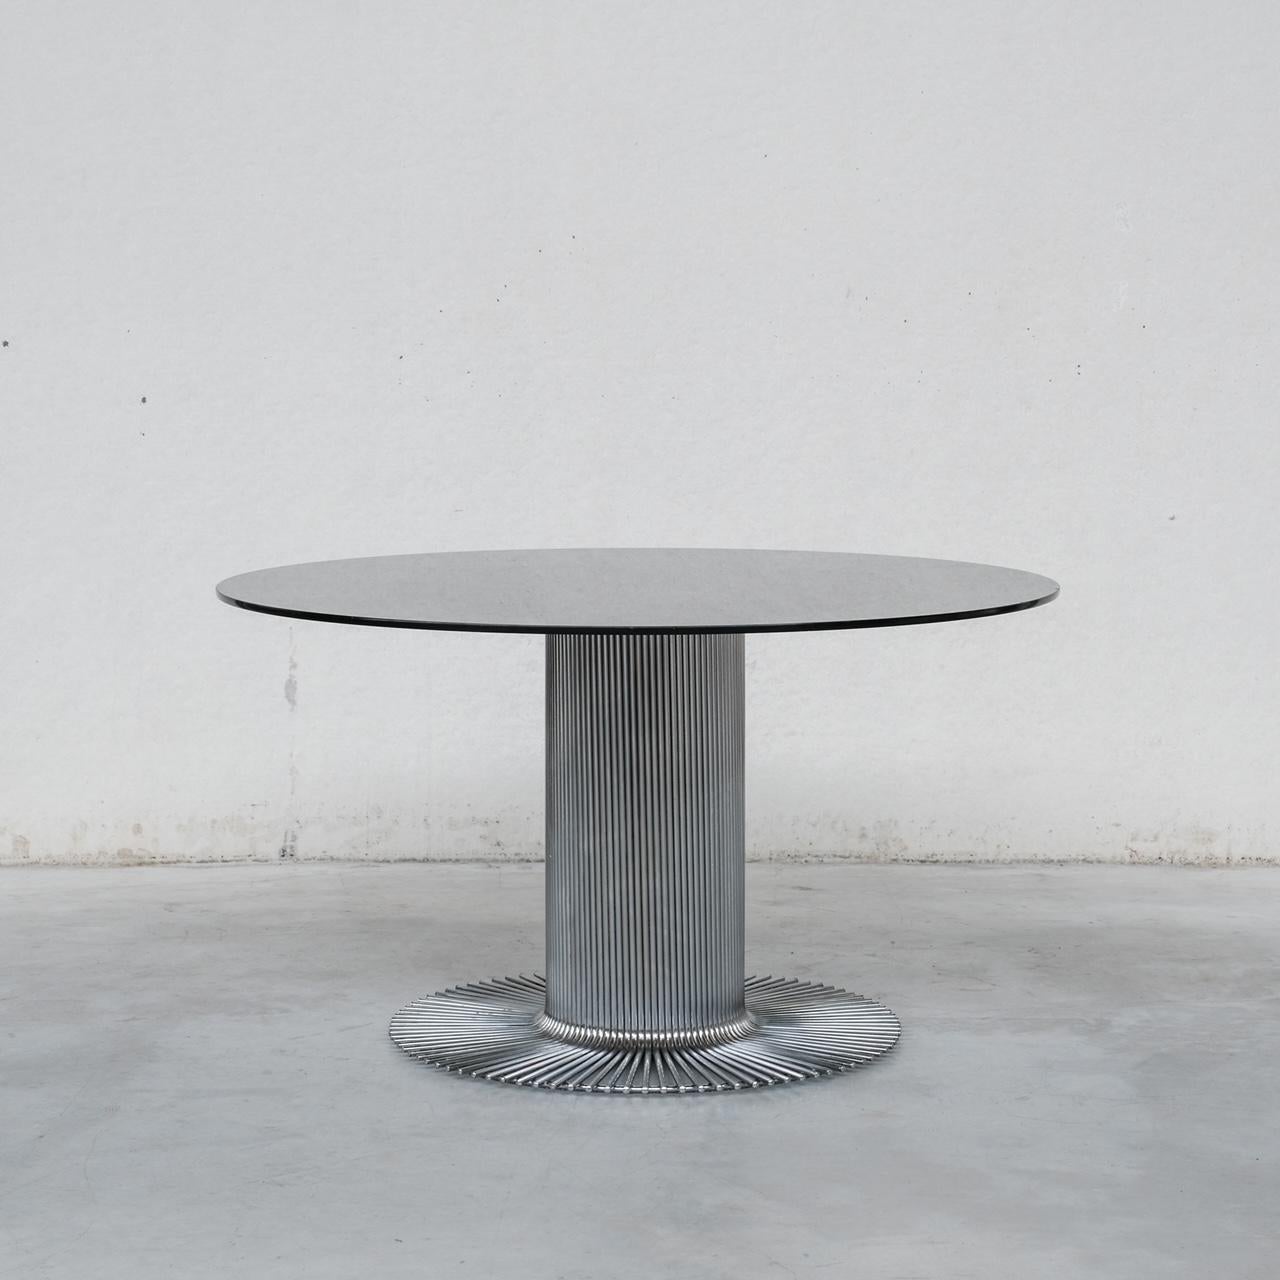 A space age style dining table by Gastone Rinaldi for Rima. 

Italy, c1970s. 

Smoked glass top remains in good condition but there are surface scratches present. 

Good vintage condition. 

PRICES ARE EXCLUSIVE OF VAT IF SOLD IN THE UK. 

Location: